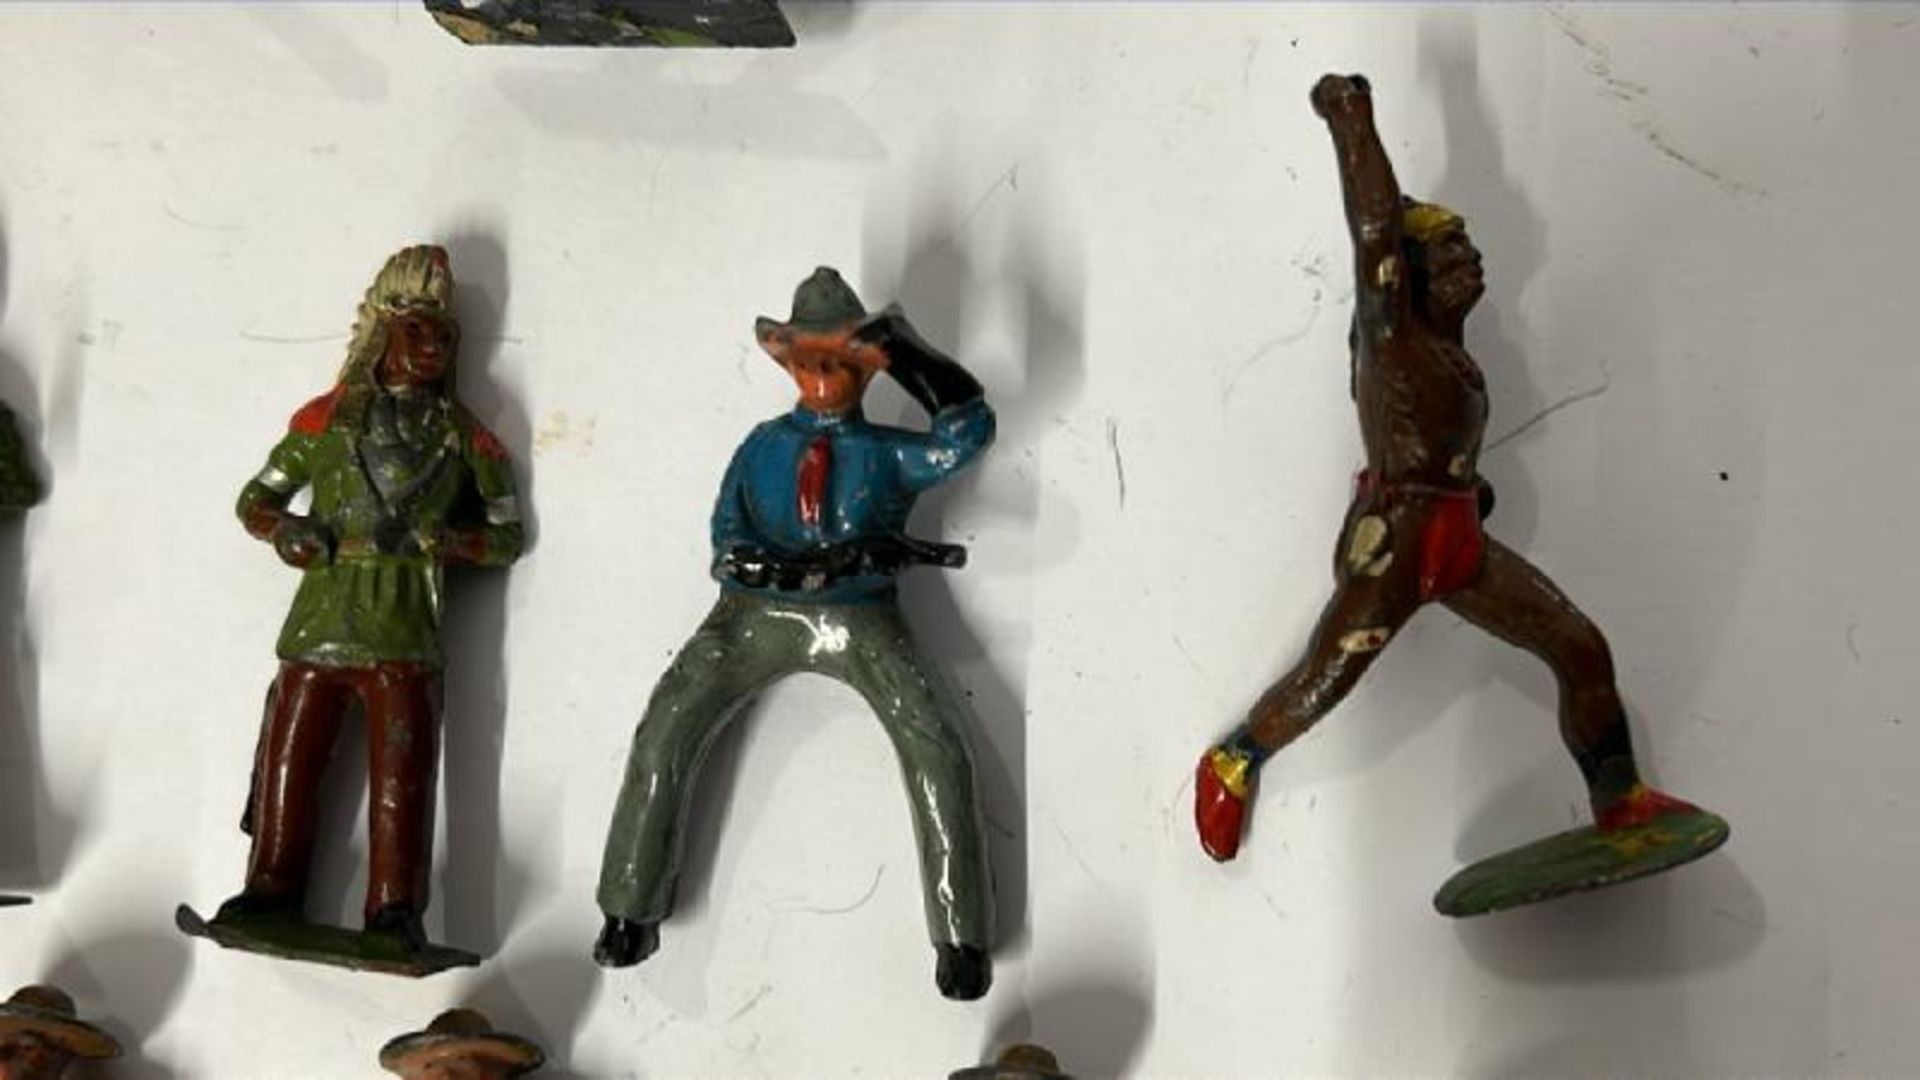 Mainly Britains lead 'Wild West' figures including horses, Cowboys and Native American warriors (29) - Image 9 of 11